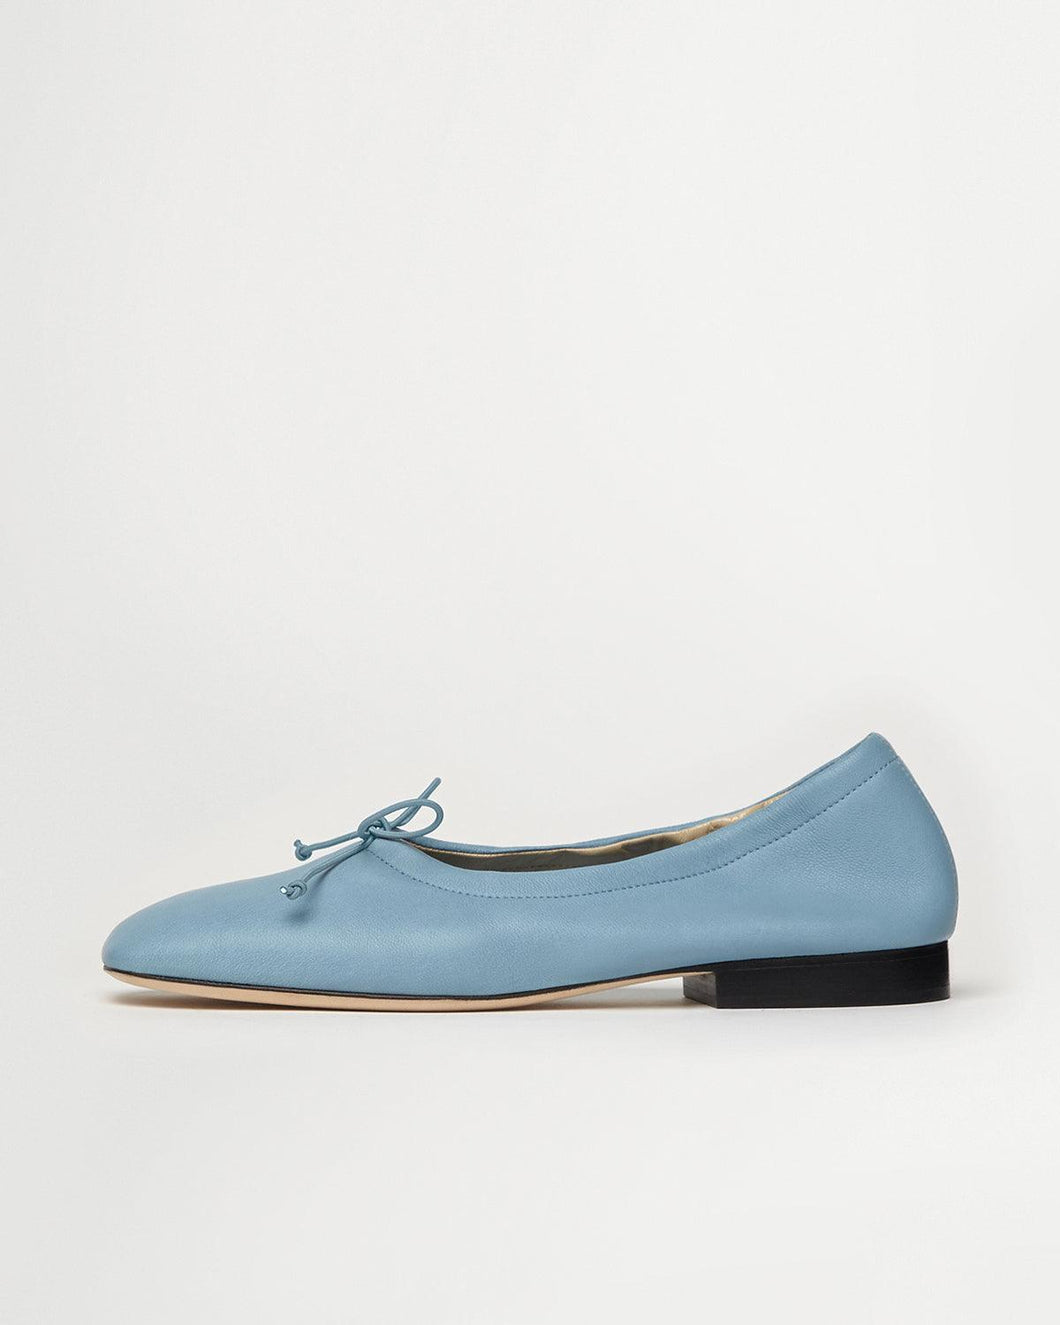 Side view of Yuni Buffa Pia Ballet flat designer shoe in Bermuda blue. Luxury hand crafted square toe ballet flats made in Italy with Italian soft Lamb Nappa leather.